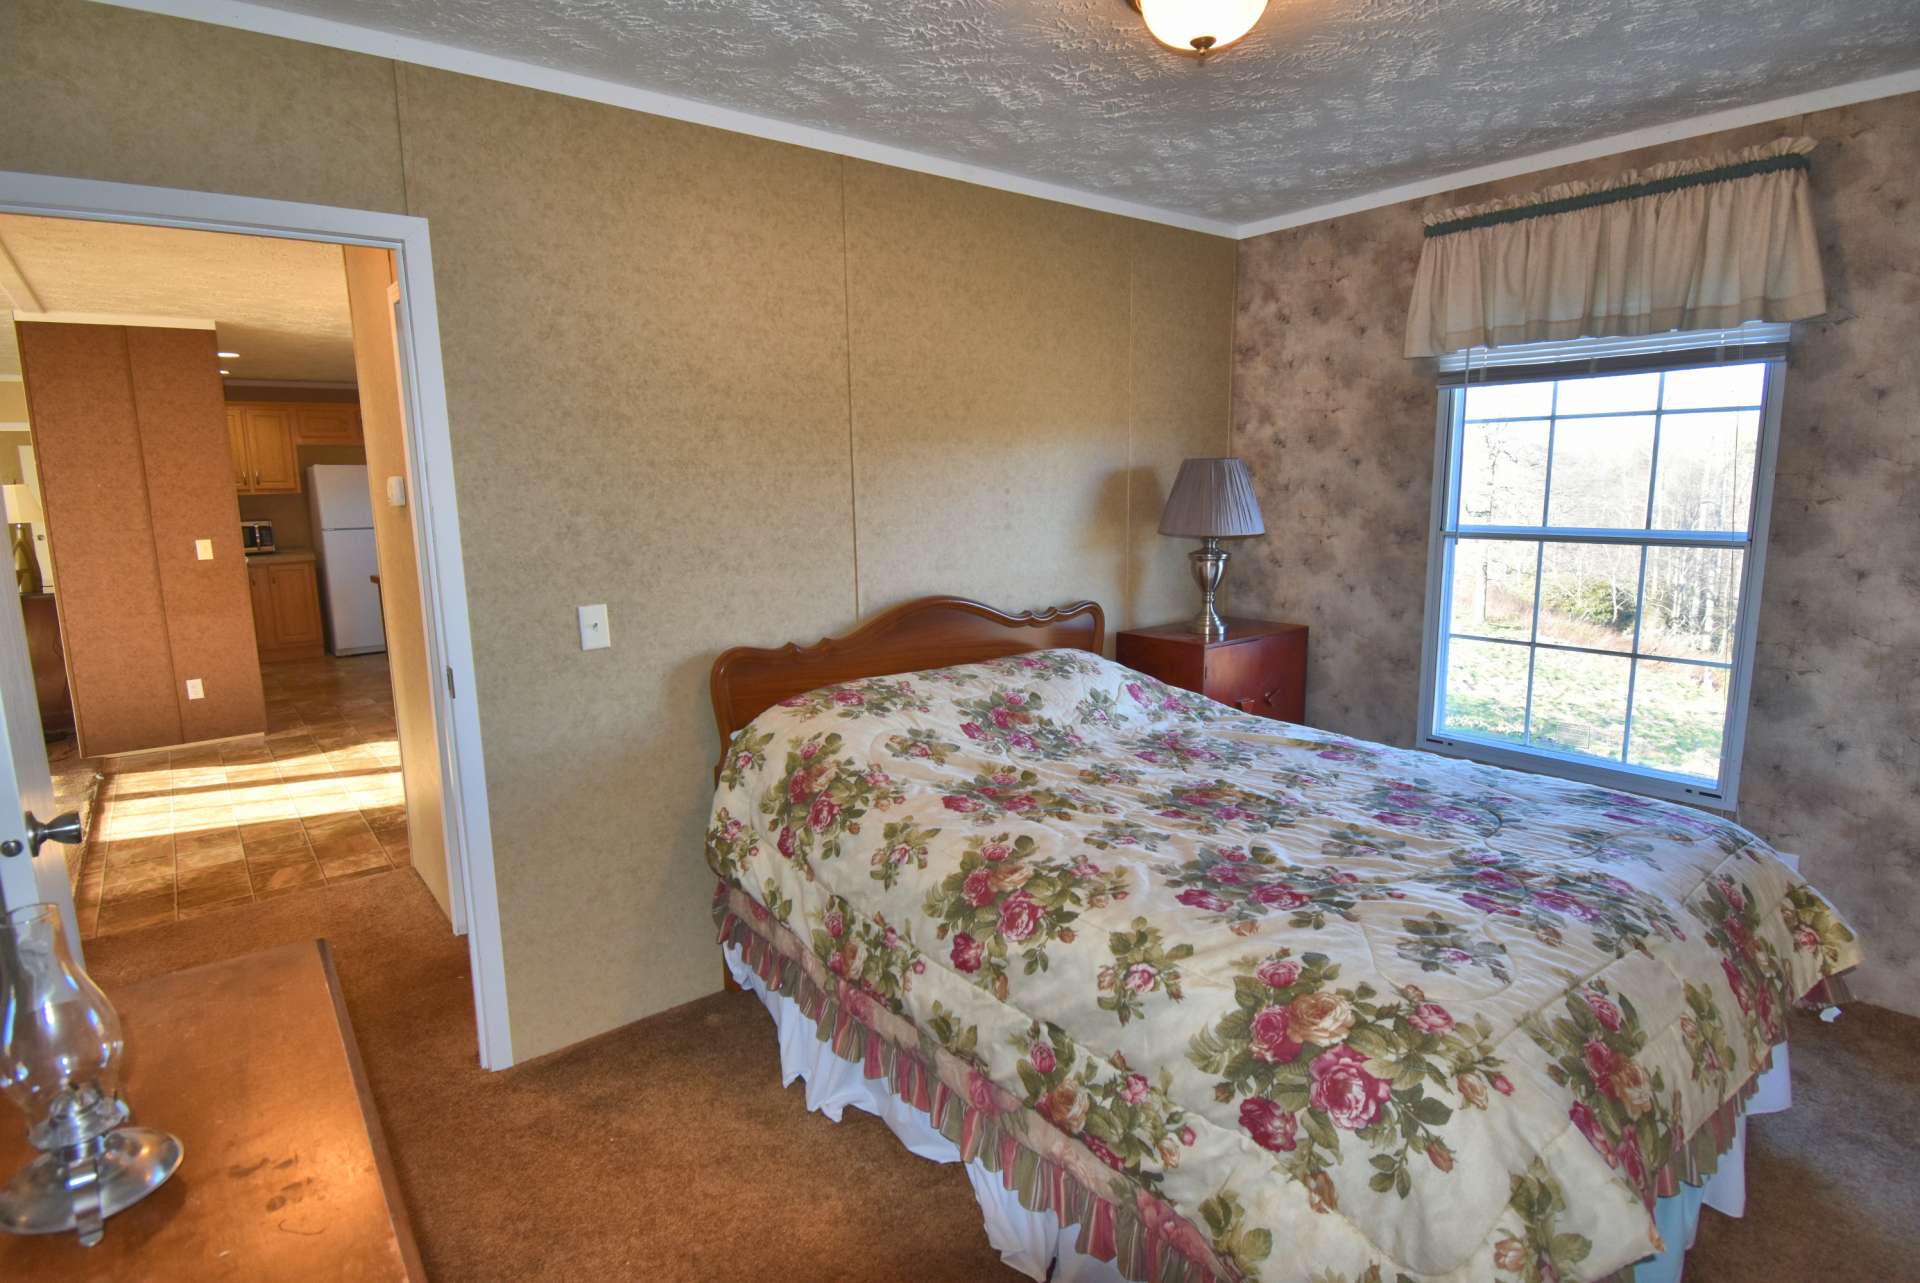 All of the bedrooms have walk-in closets. A second full bath completes the floor plan.